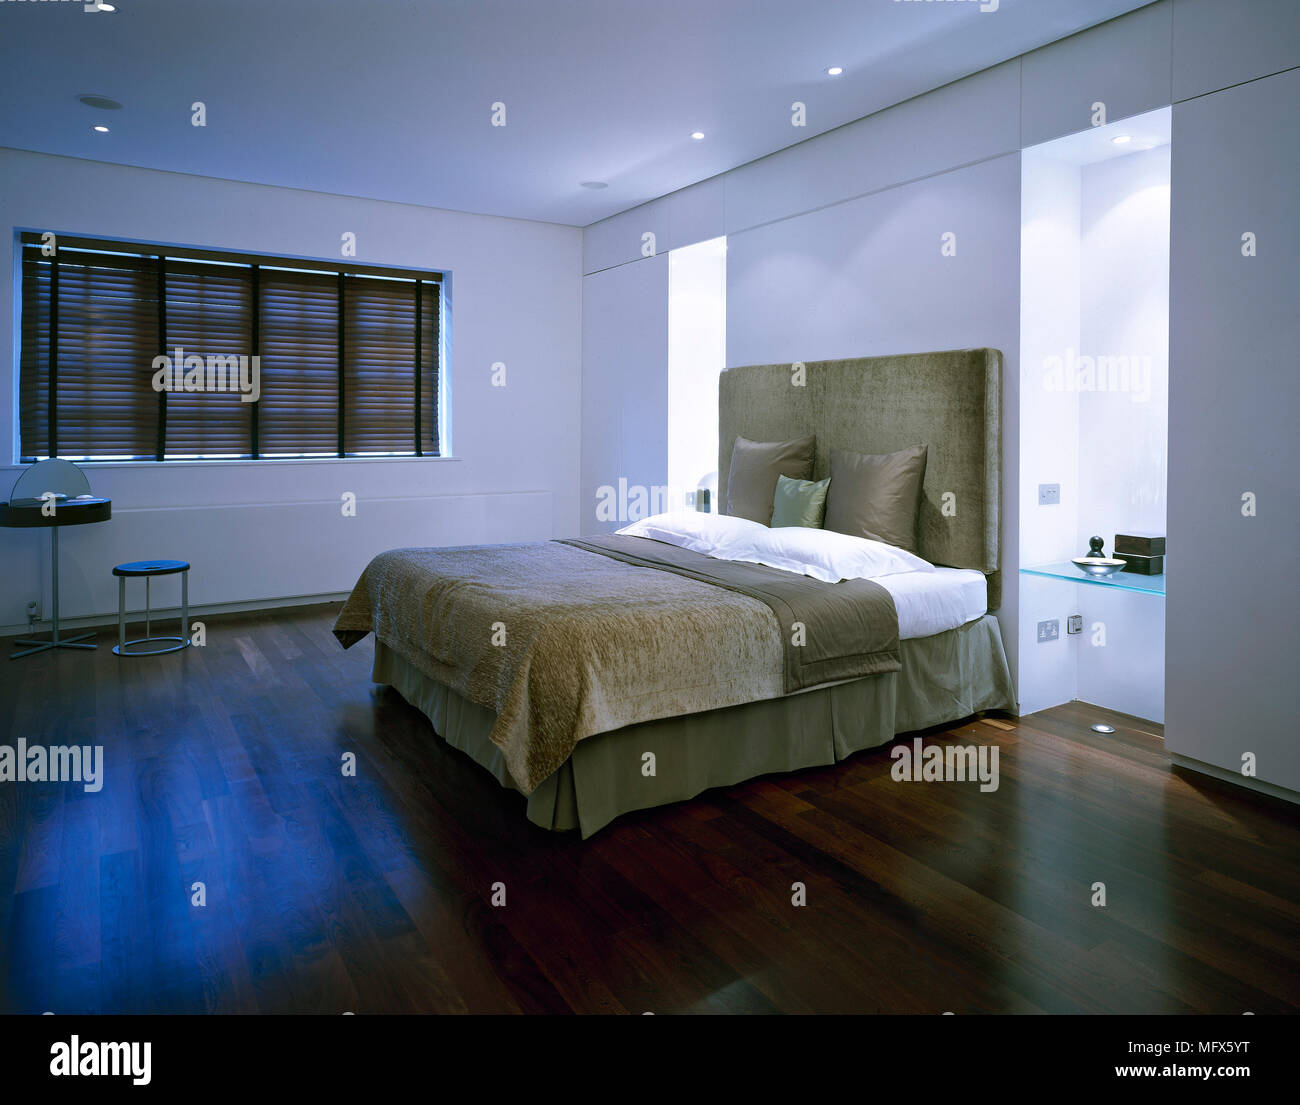 Modern Bedroom With A Wood Floor Double Bed Upholstered